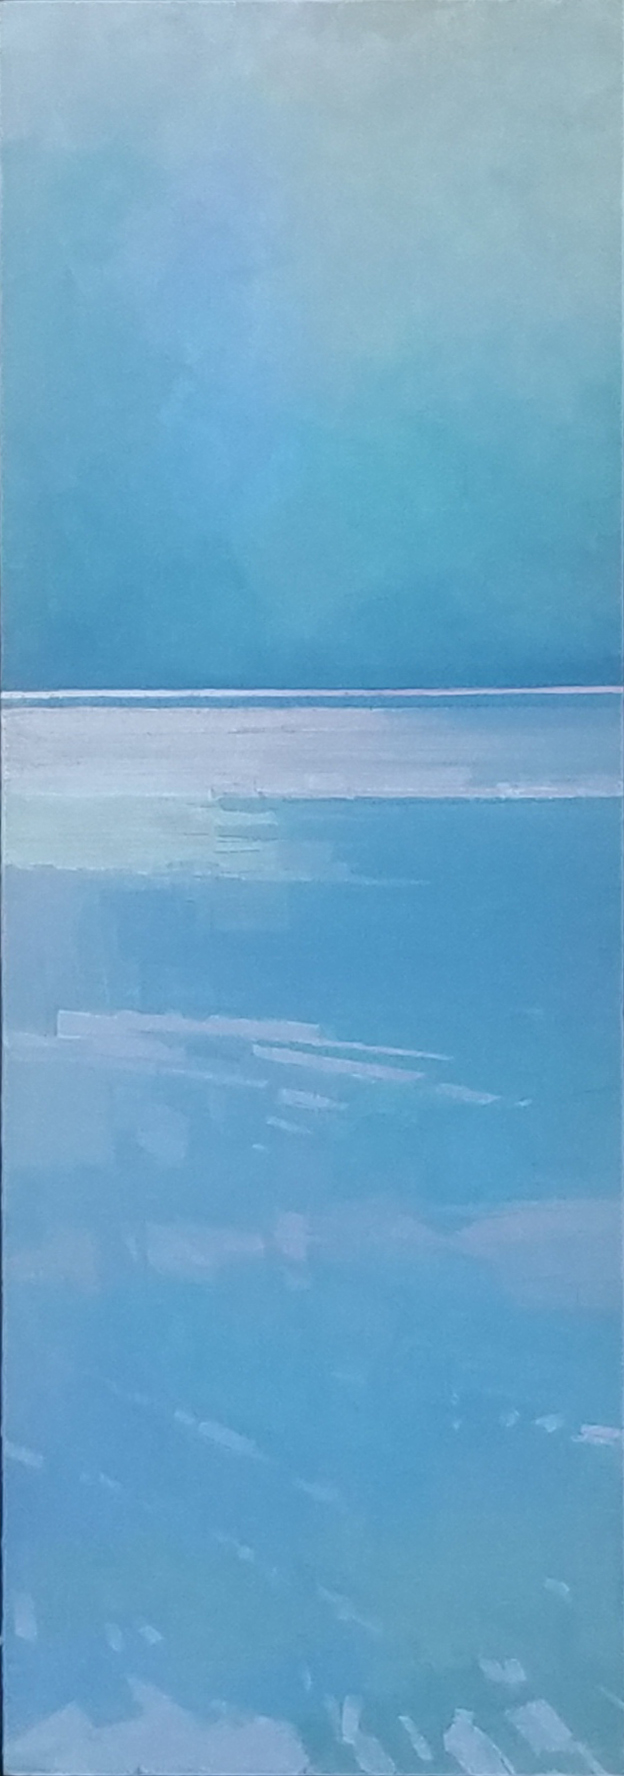   Calm Ocean  12 x 36 iridescent and interference oil   sold    Islesford Artists  